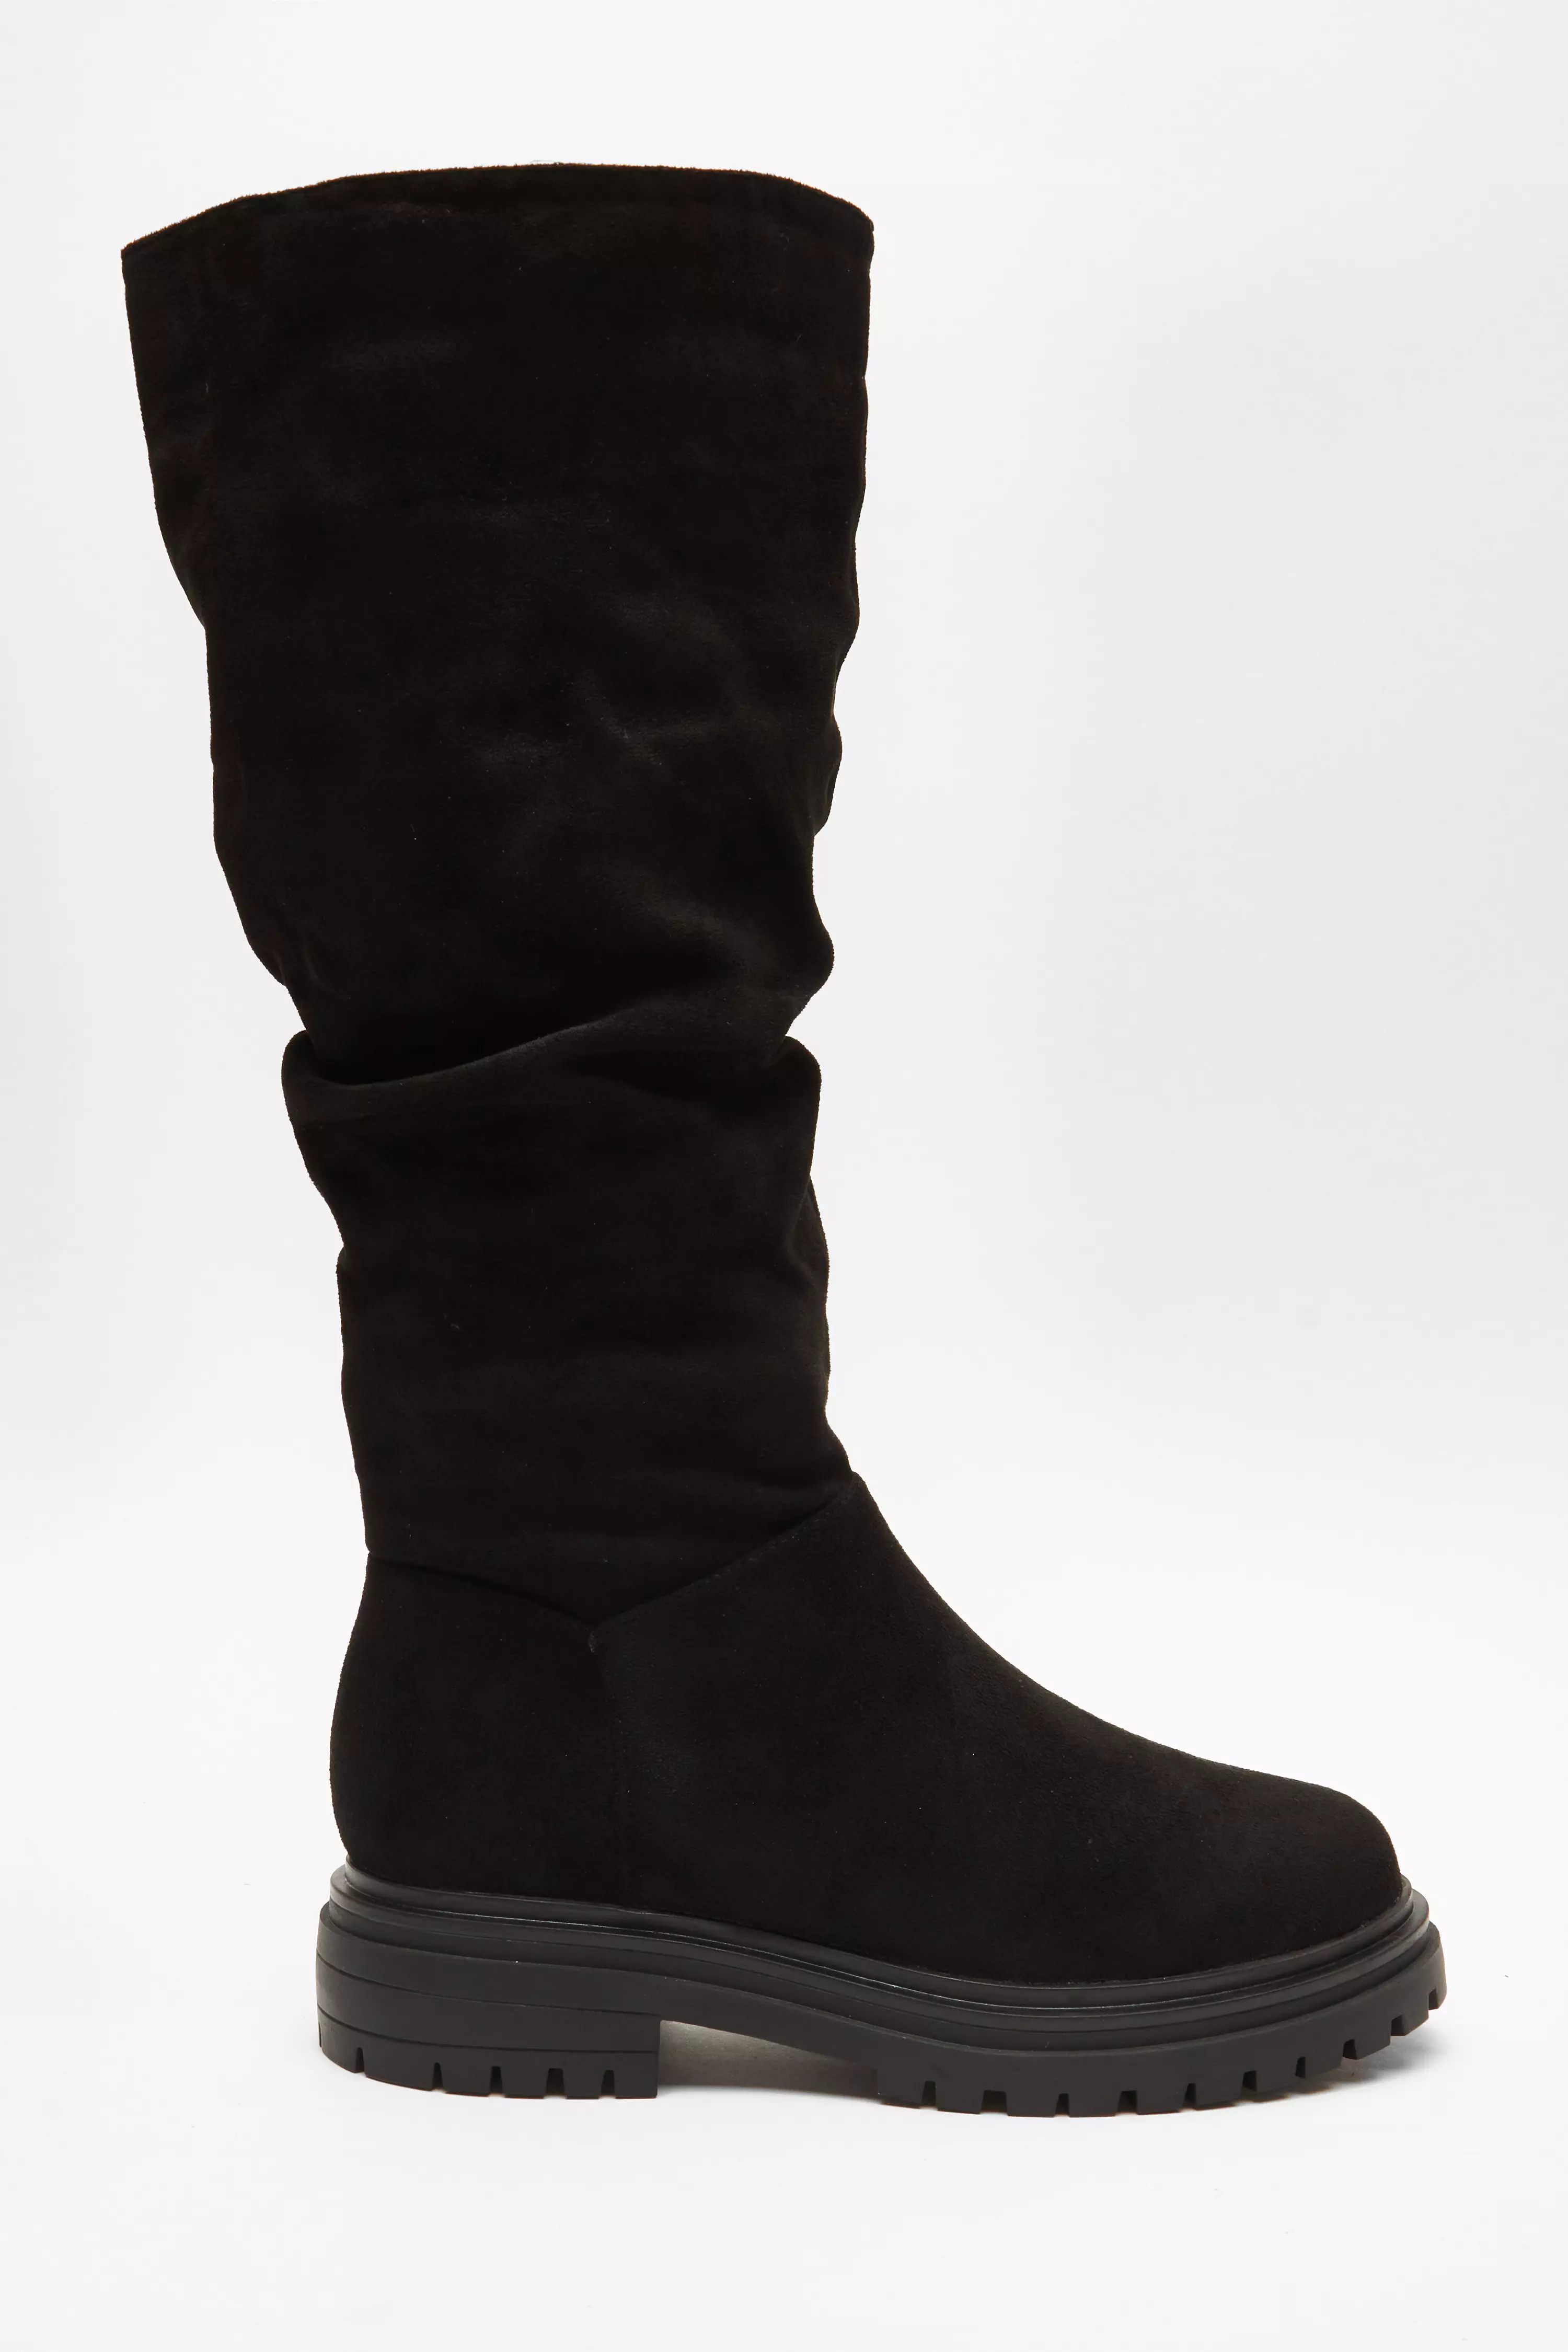 Wide Fit Black Knee High Faux Suede Boots